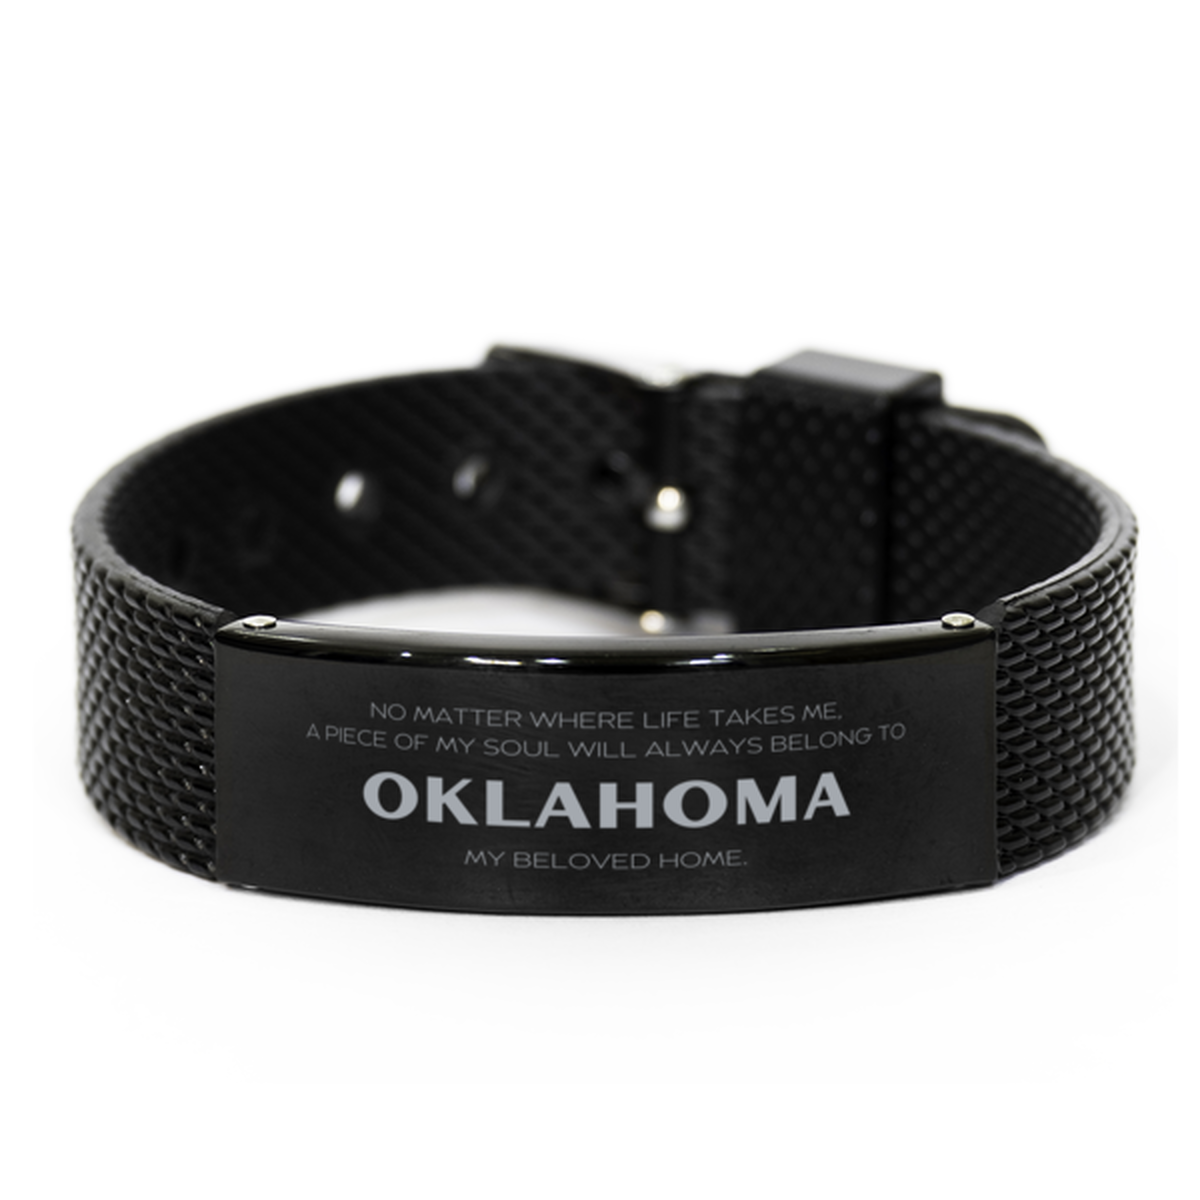 Love Oklahoma State Gifts, My soul will always belong to Oklahoma, Proud Black Shark Mesh Bracelet, Birthday Unique Gifts For Oklahoma Men, Women, Friends